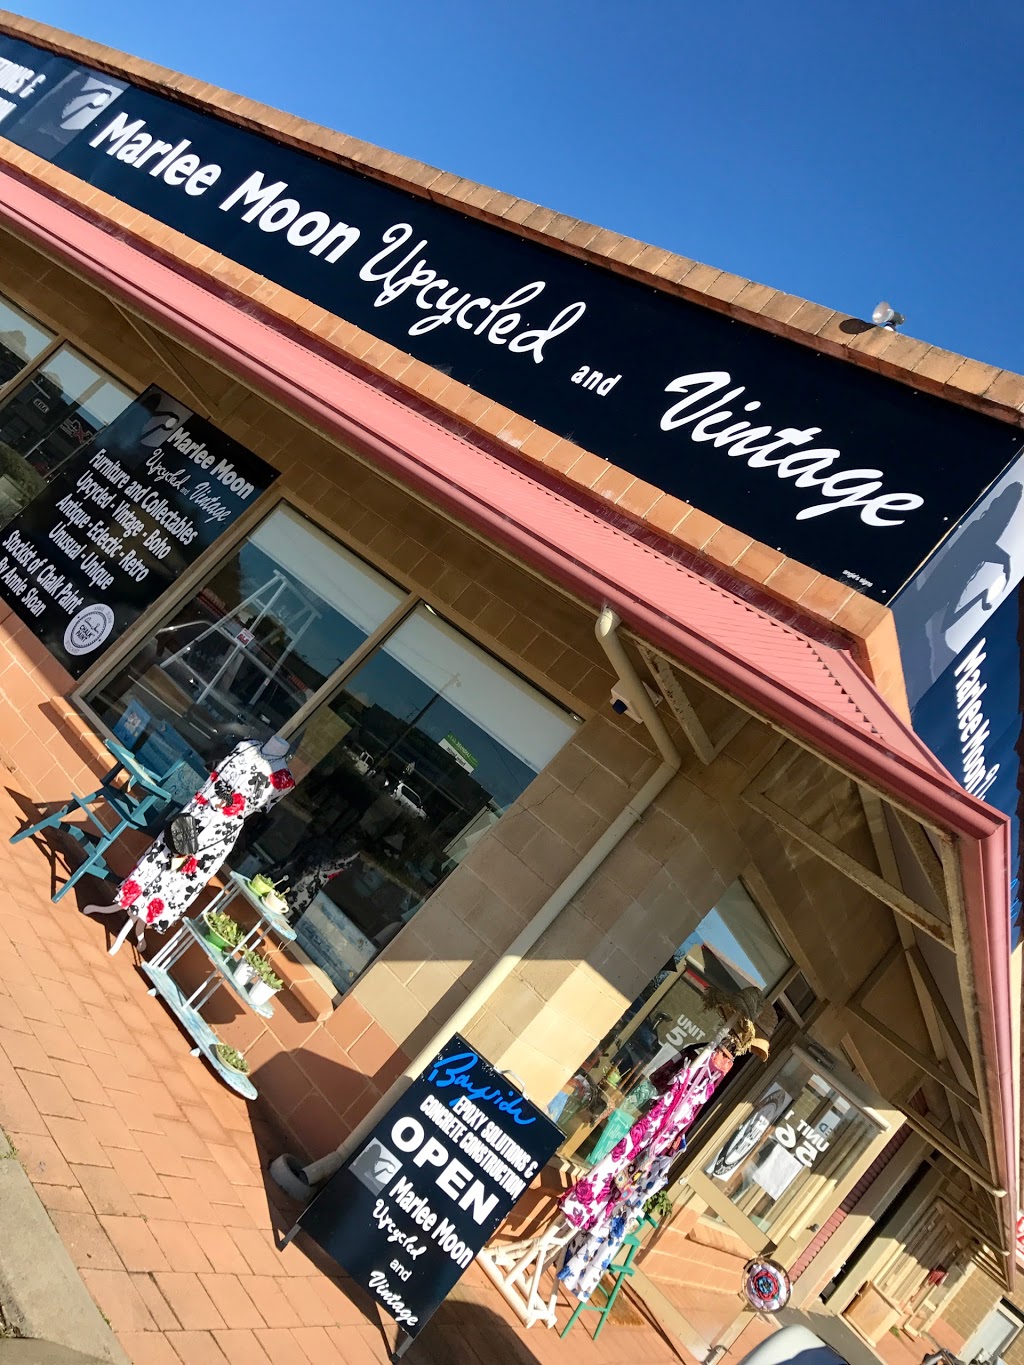 Marlee Moon Upcycled and Vintage | 1/56 Strelly St, Busselton WA 6280, Australia | Phone: 0458 633 089